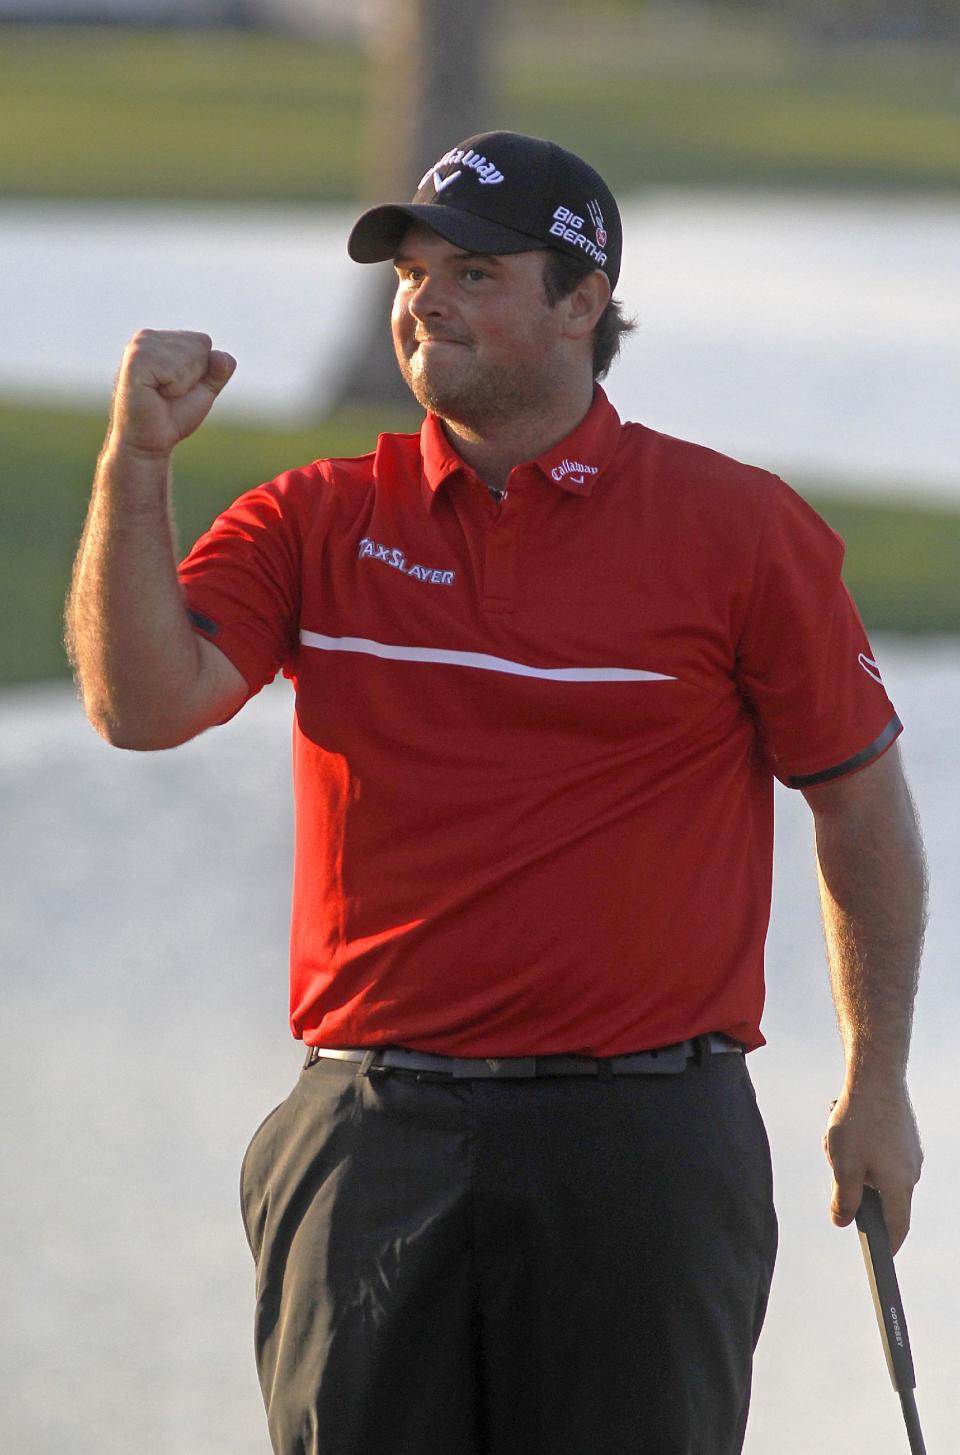 Patrick Reed celebrates his one stroke victory during the final round of the Cadillac Championship golf tournament Sunday, March 9, 2014, in Doral, Fla. Reed won the tournament with a four-under-par 284. (AP Photo/Marta Lavandier)